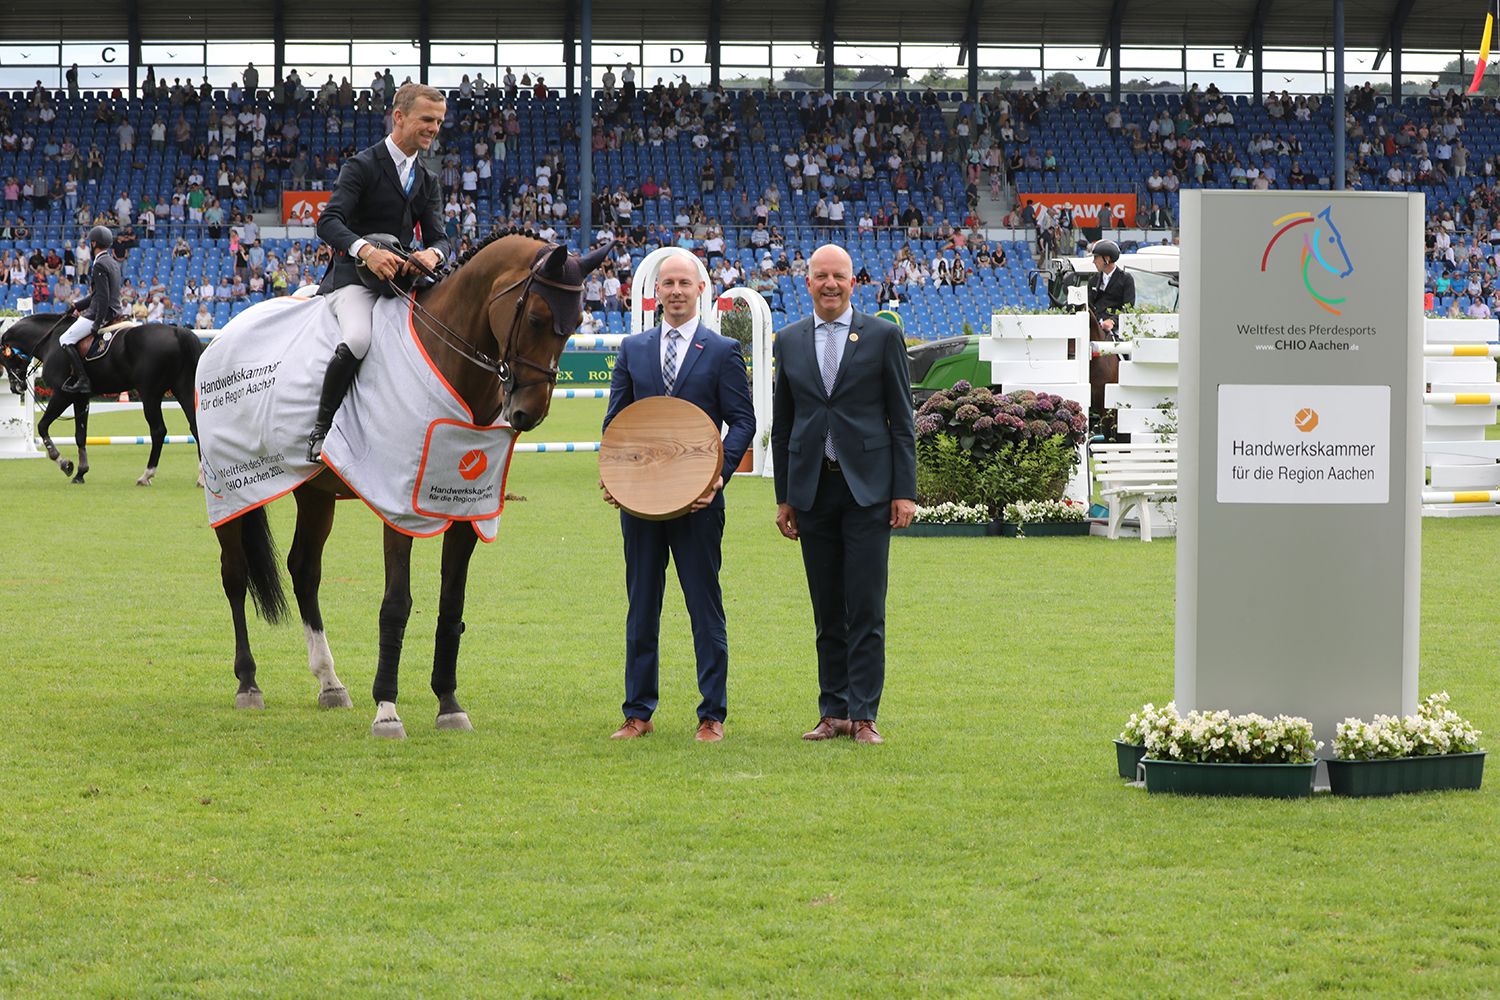 Wilm Vermeir starts CHIO Aachen with a win